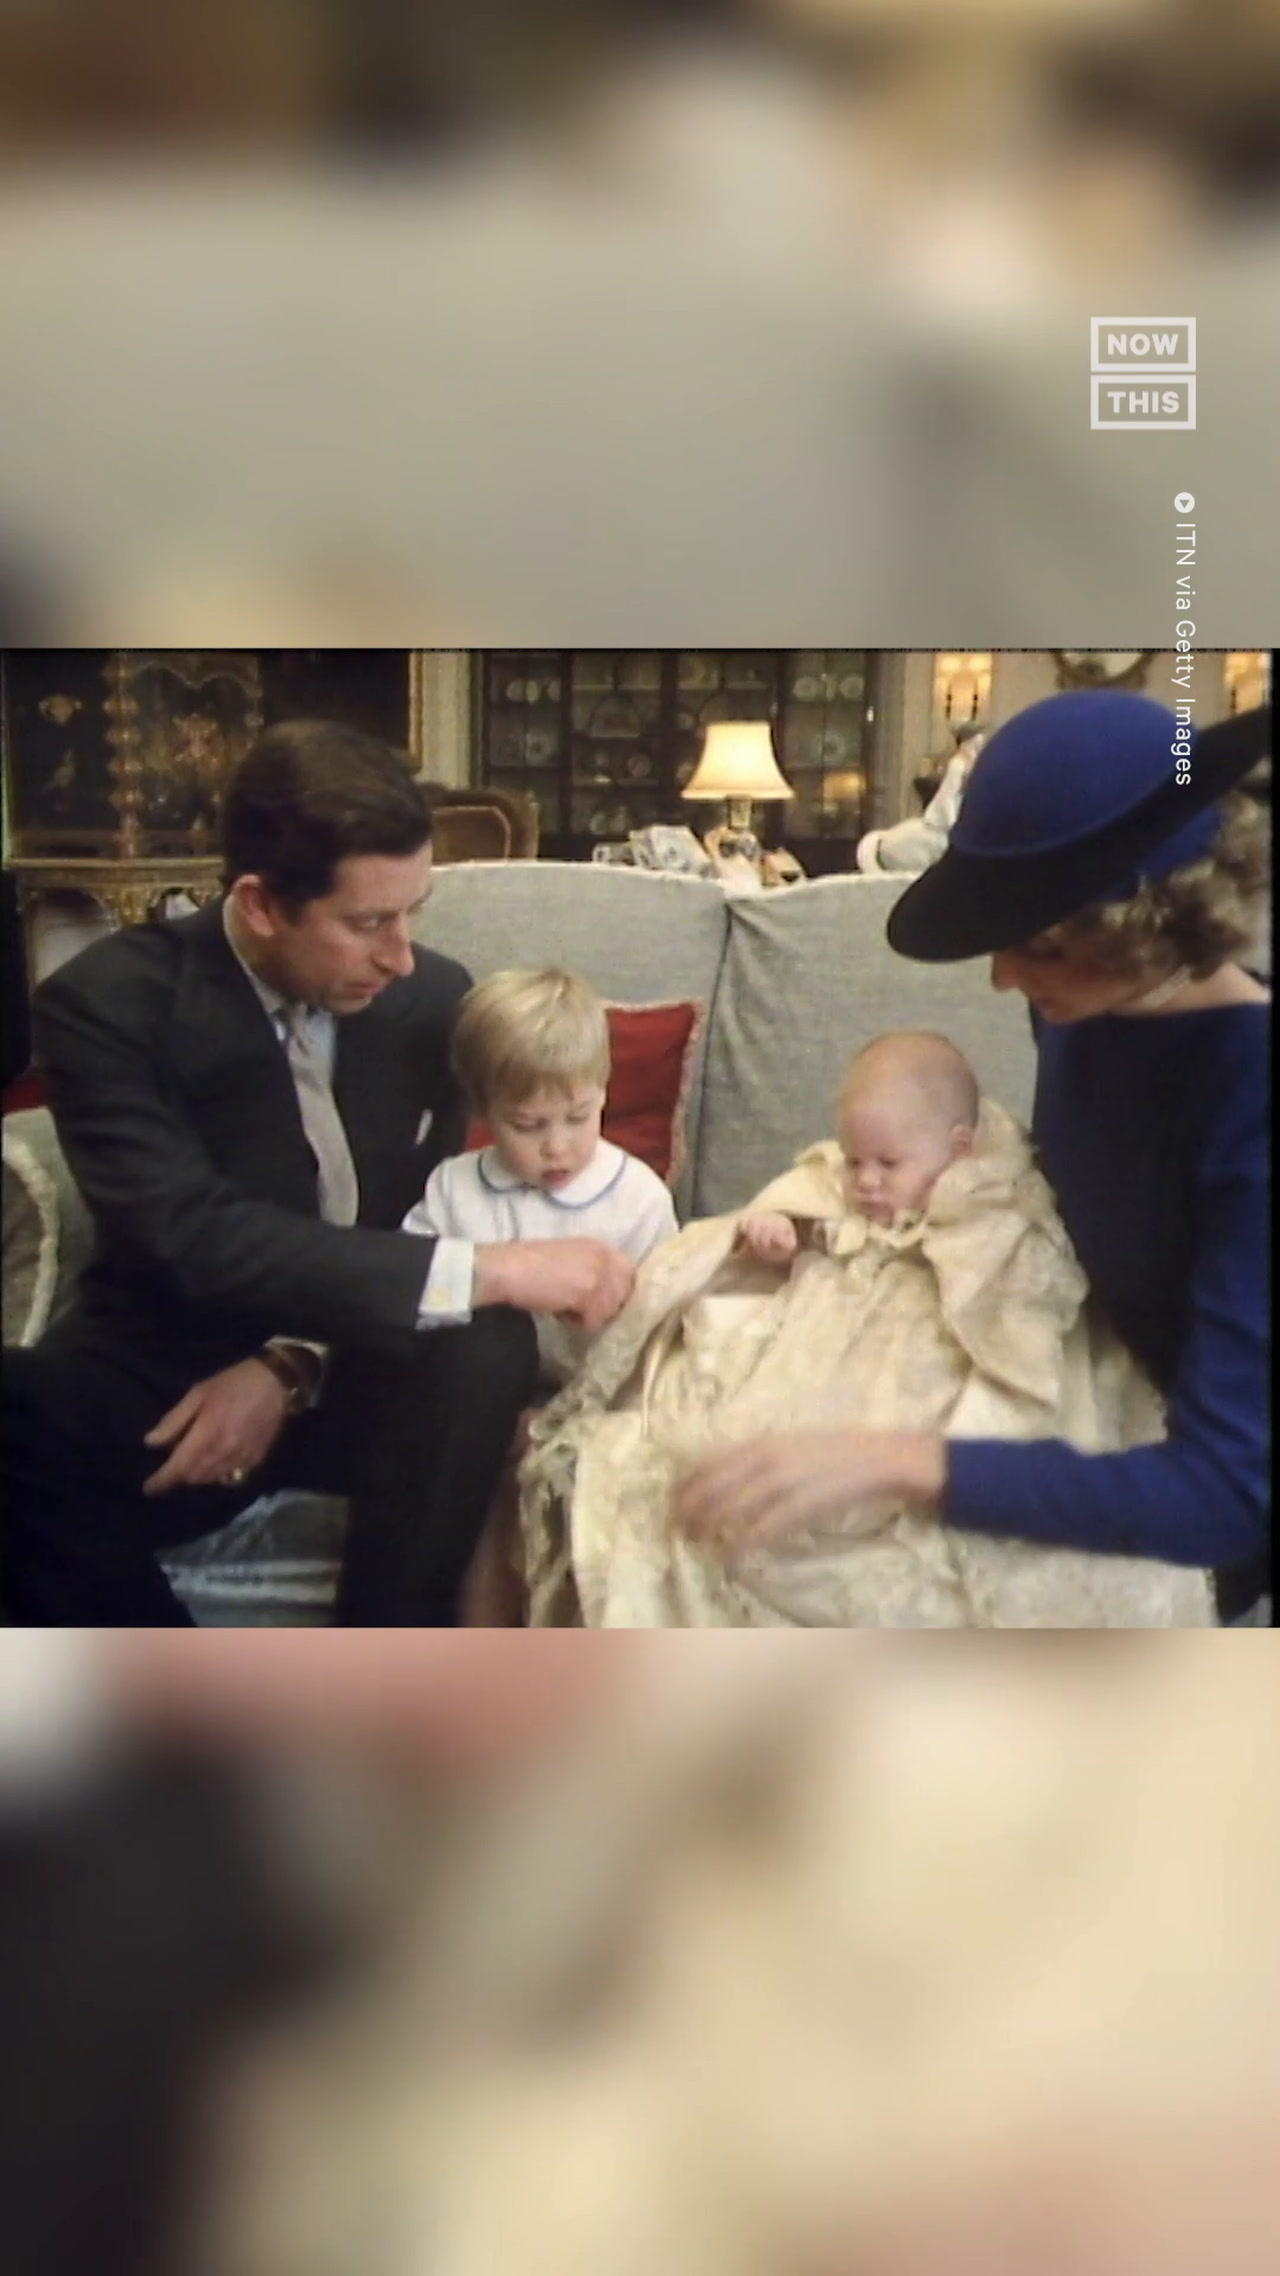 1984 Footage Shows Then-Prince Charles & Diana with Baby William & Harry